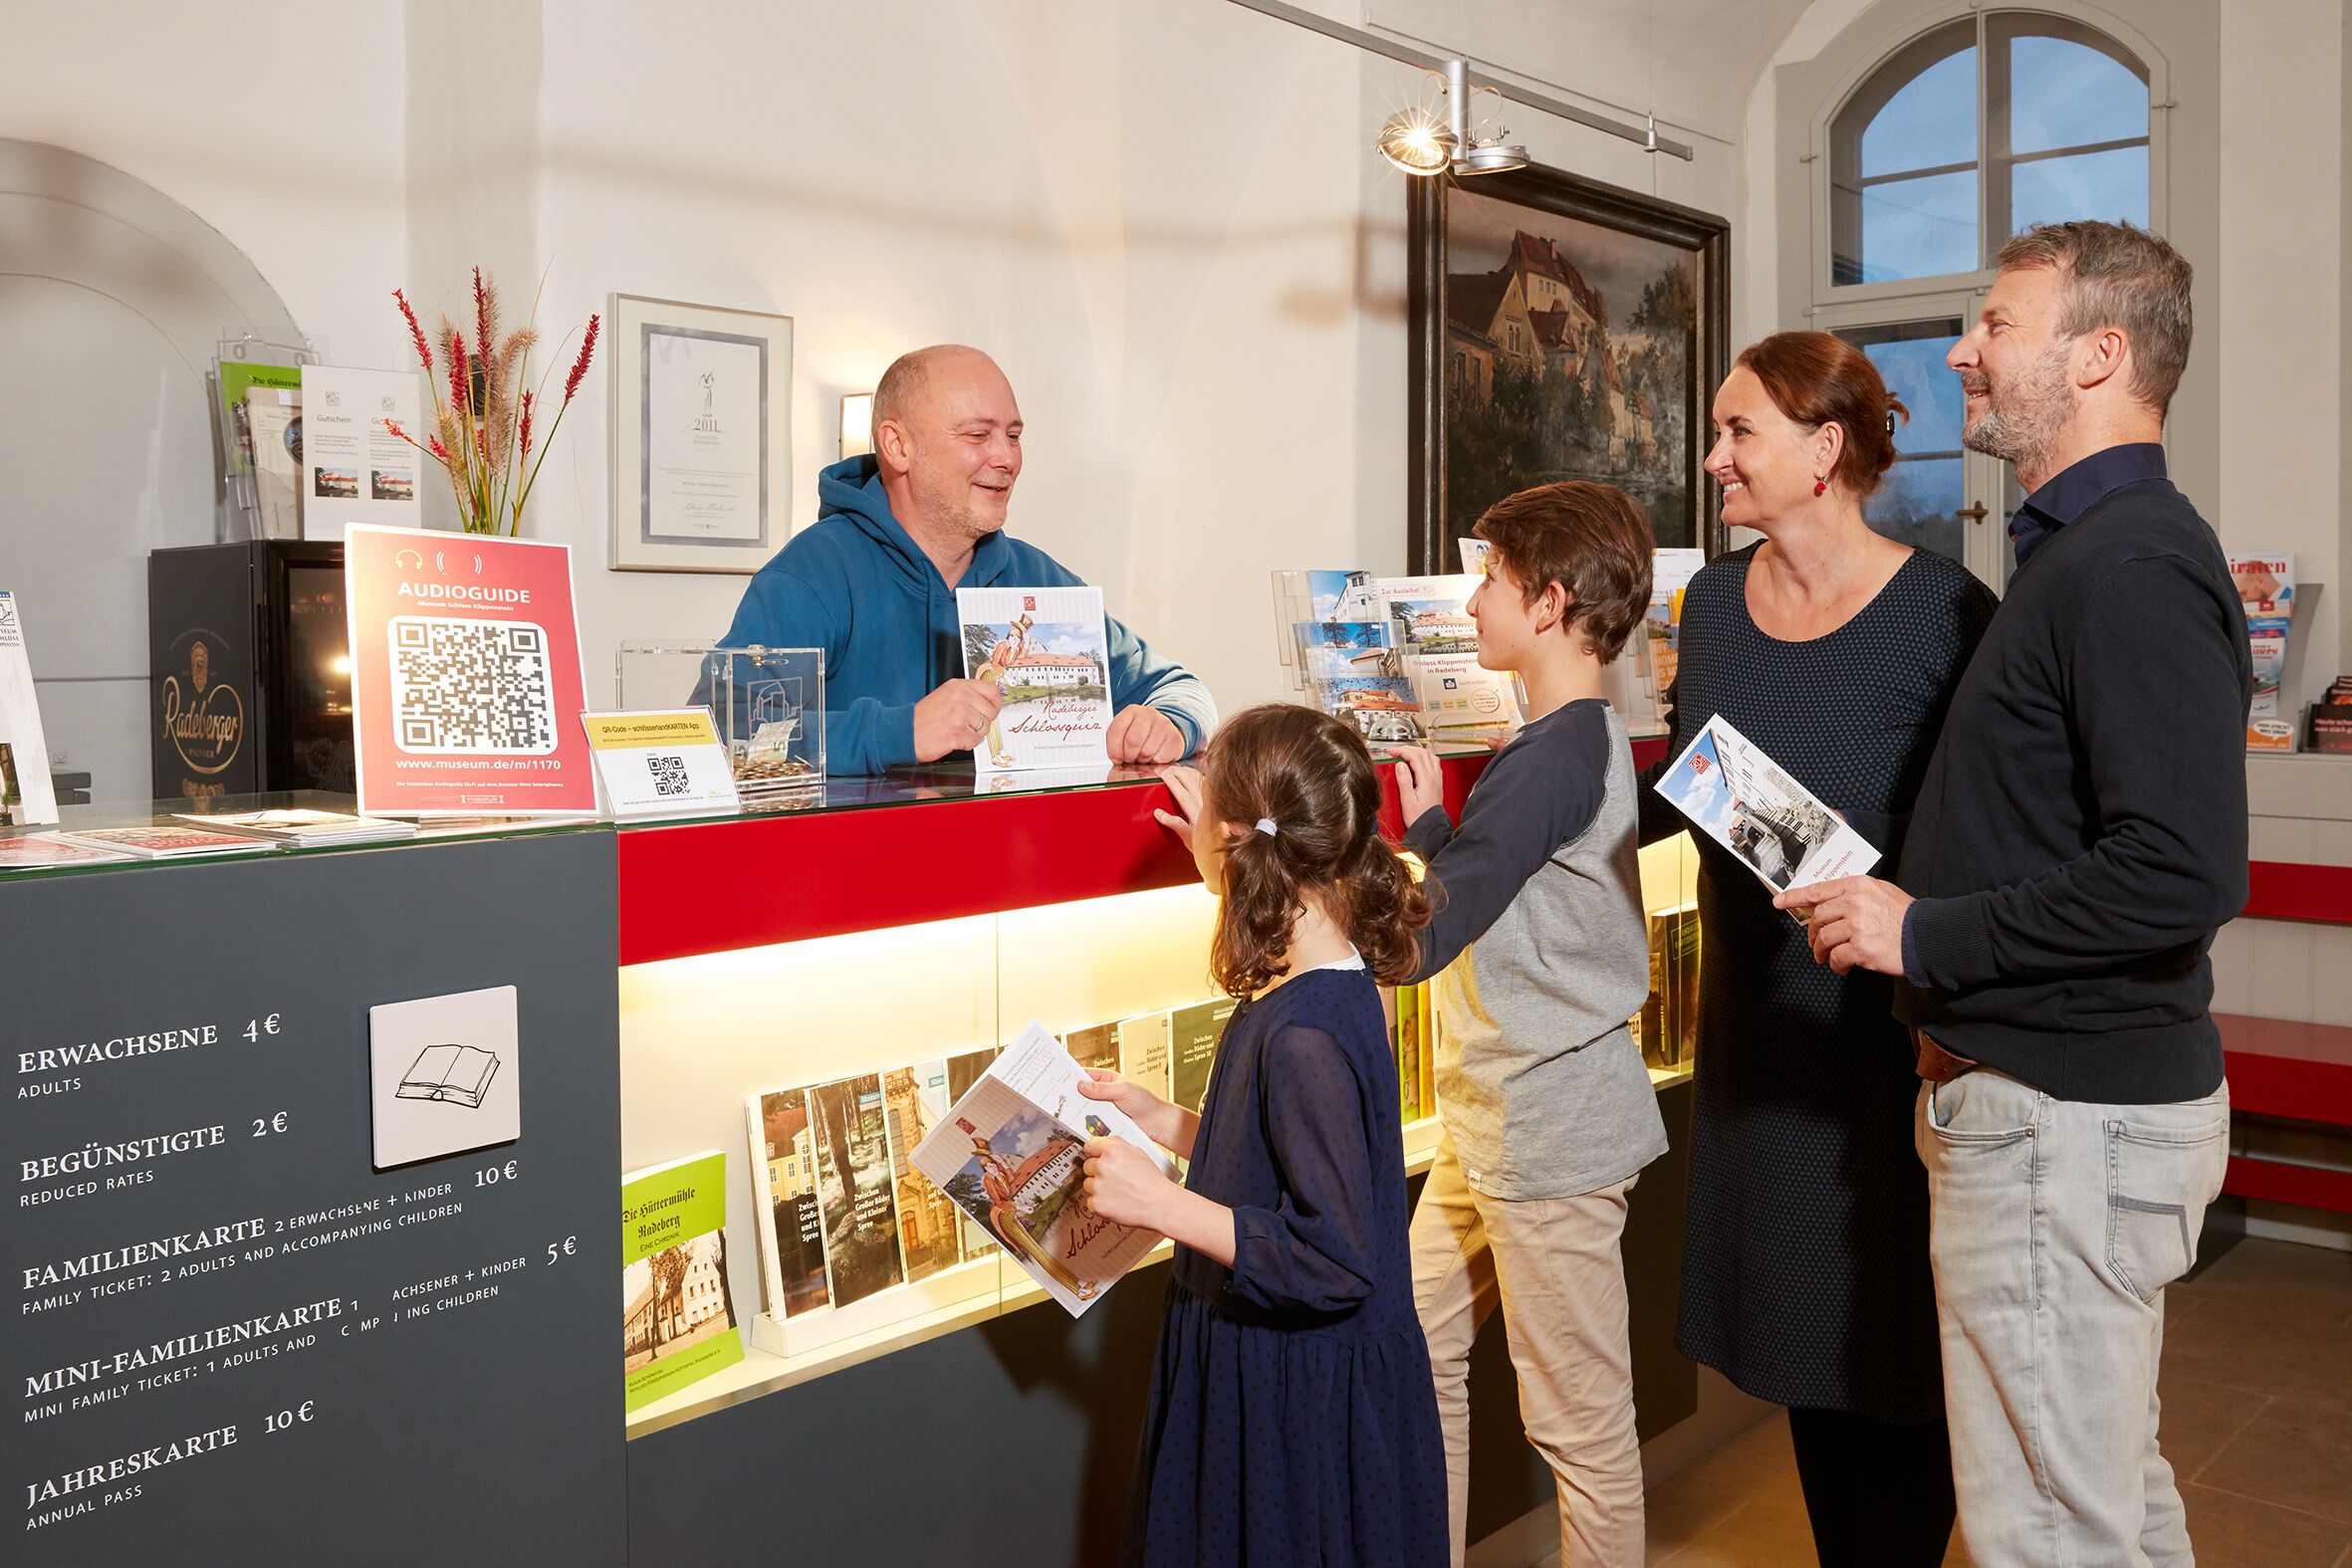 A family (parents and two schoolchildren) is standing at the counter of the castle cash desk in the entrance area of the castle.... A member of staff talks to them and shows them a booklet about the castle.